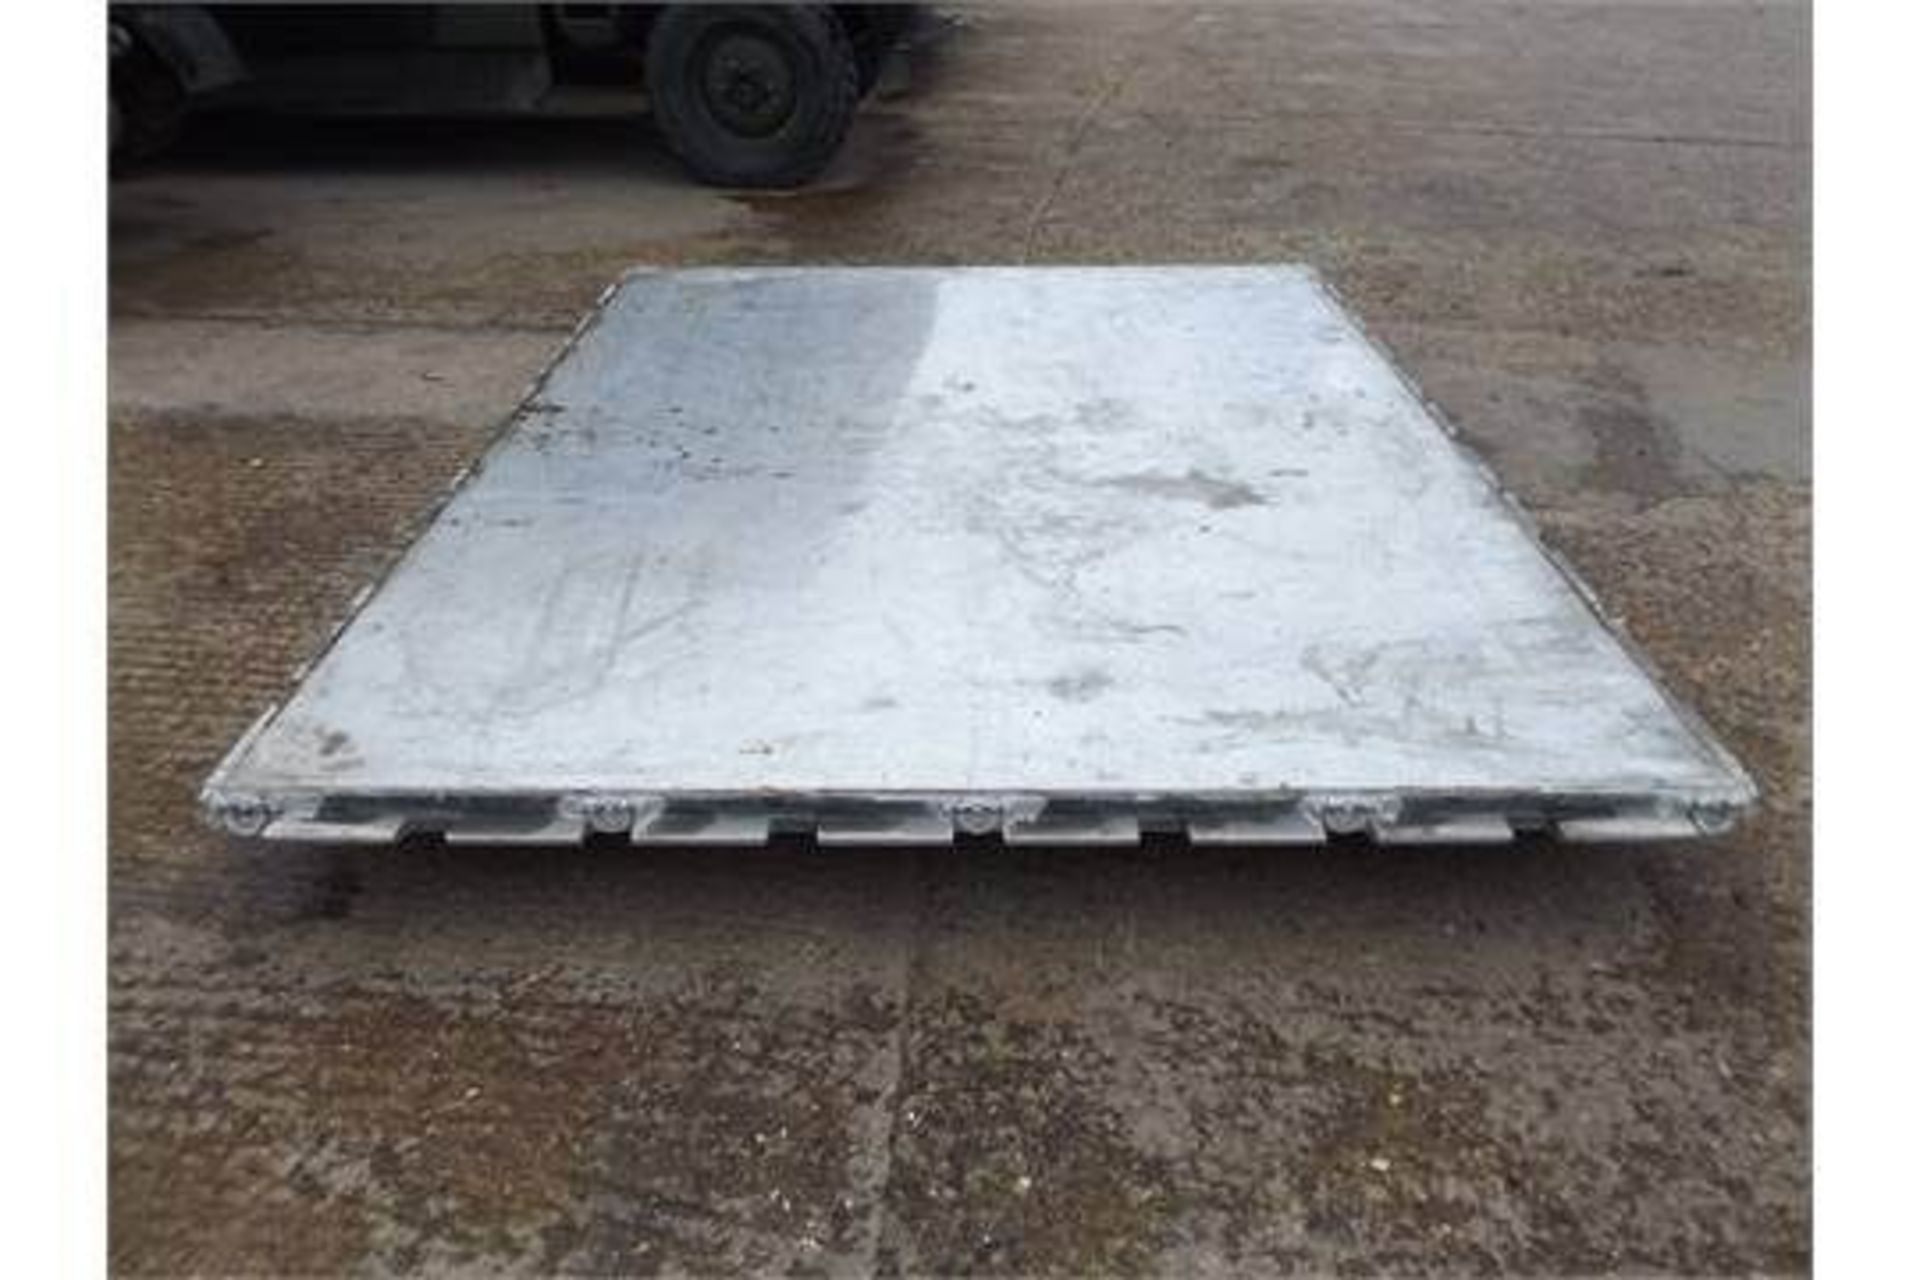 1x AAR Mobility Systems HCU6/E Aircraft Cargo Loading Pallet - Image 2 of 6